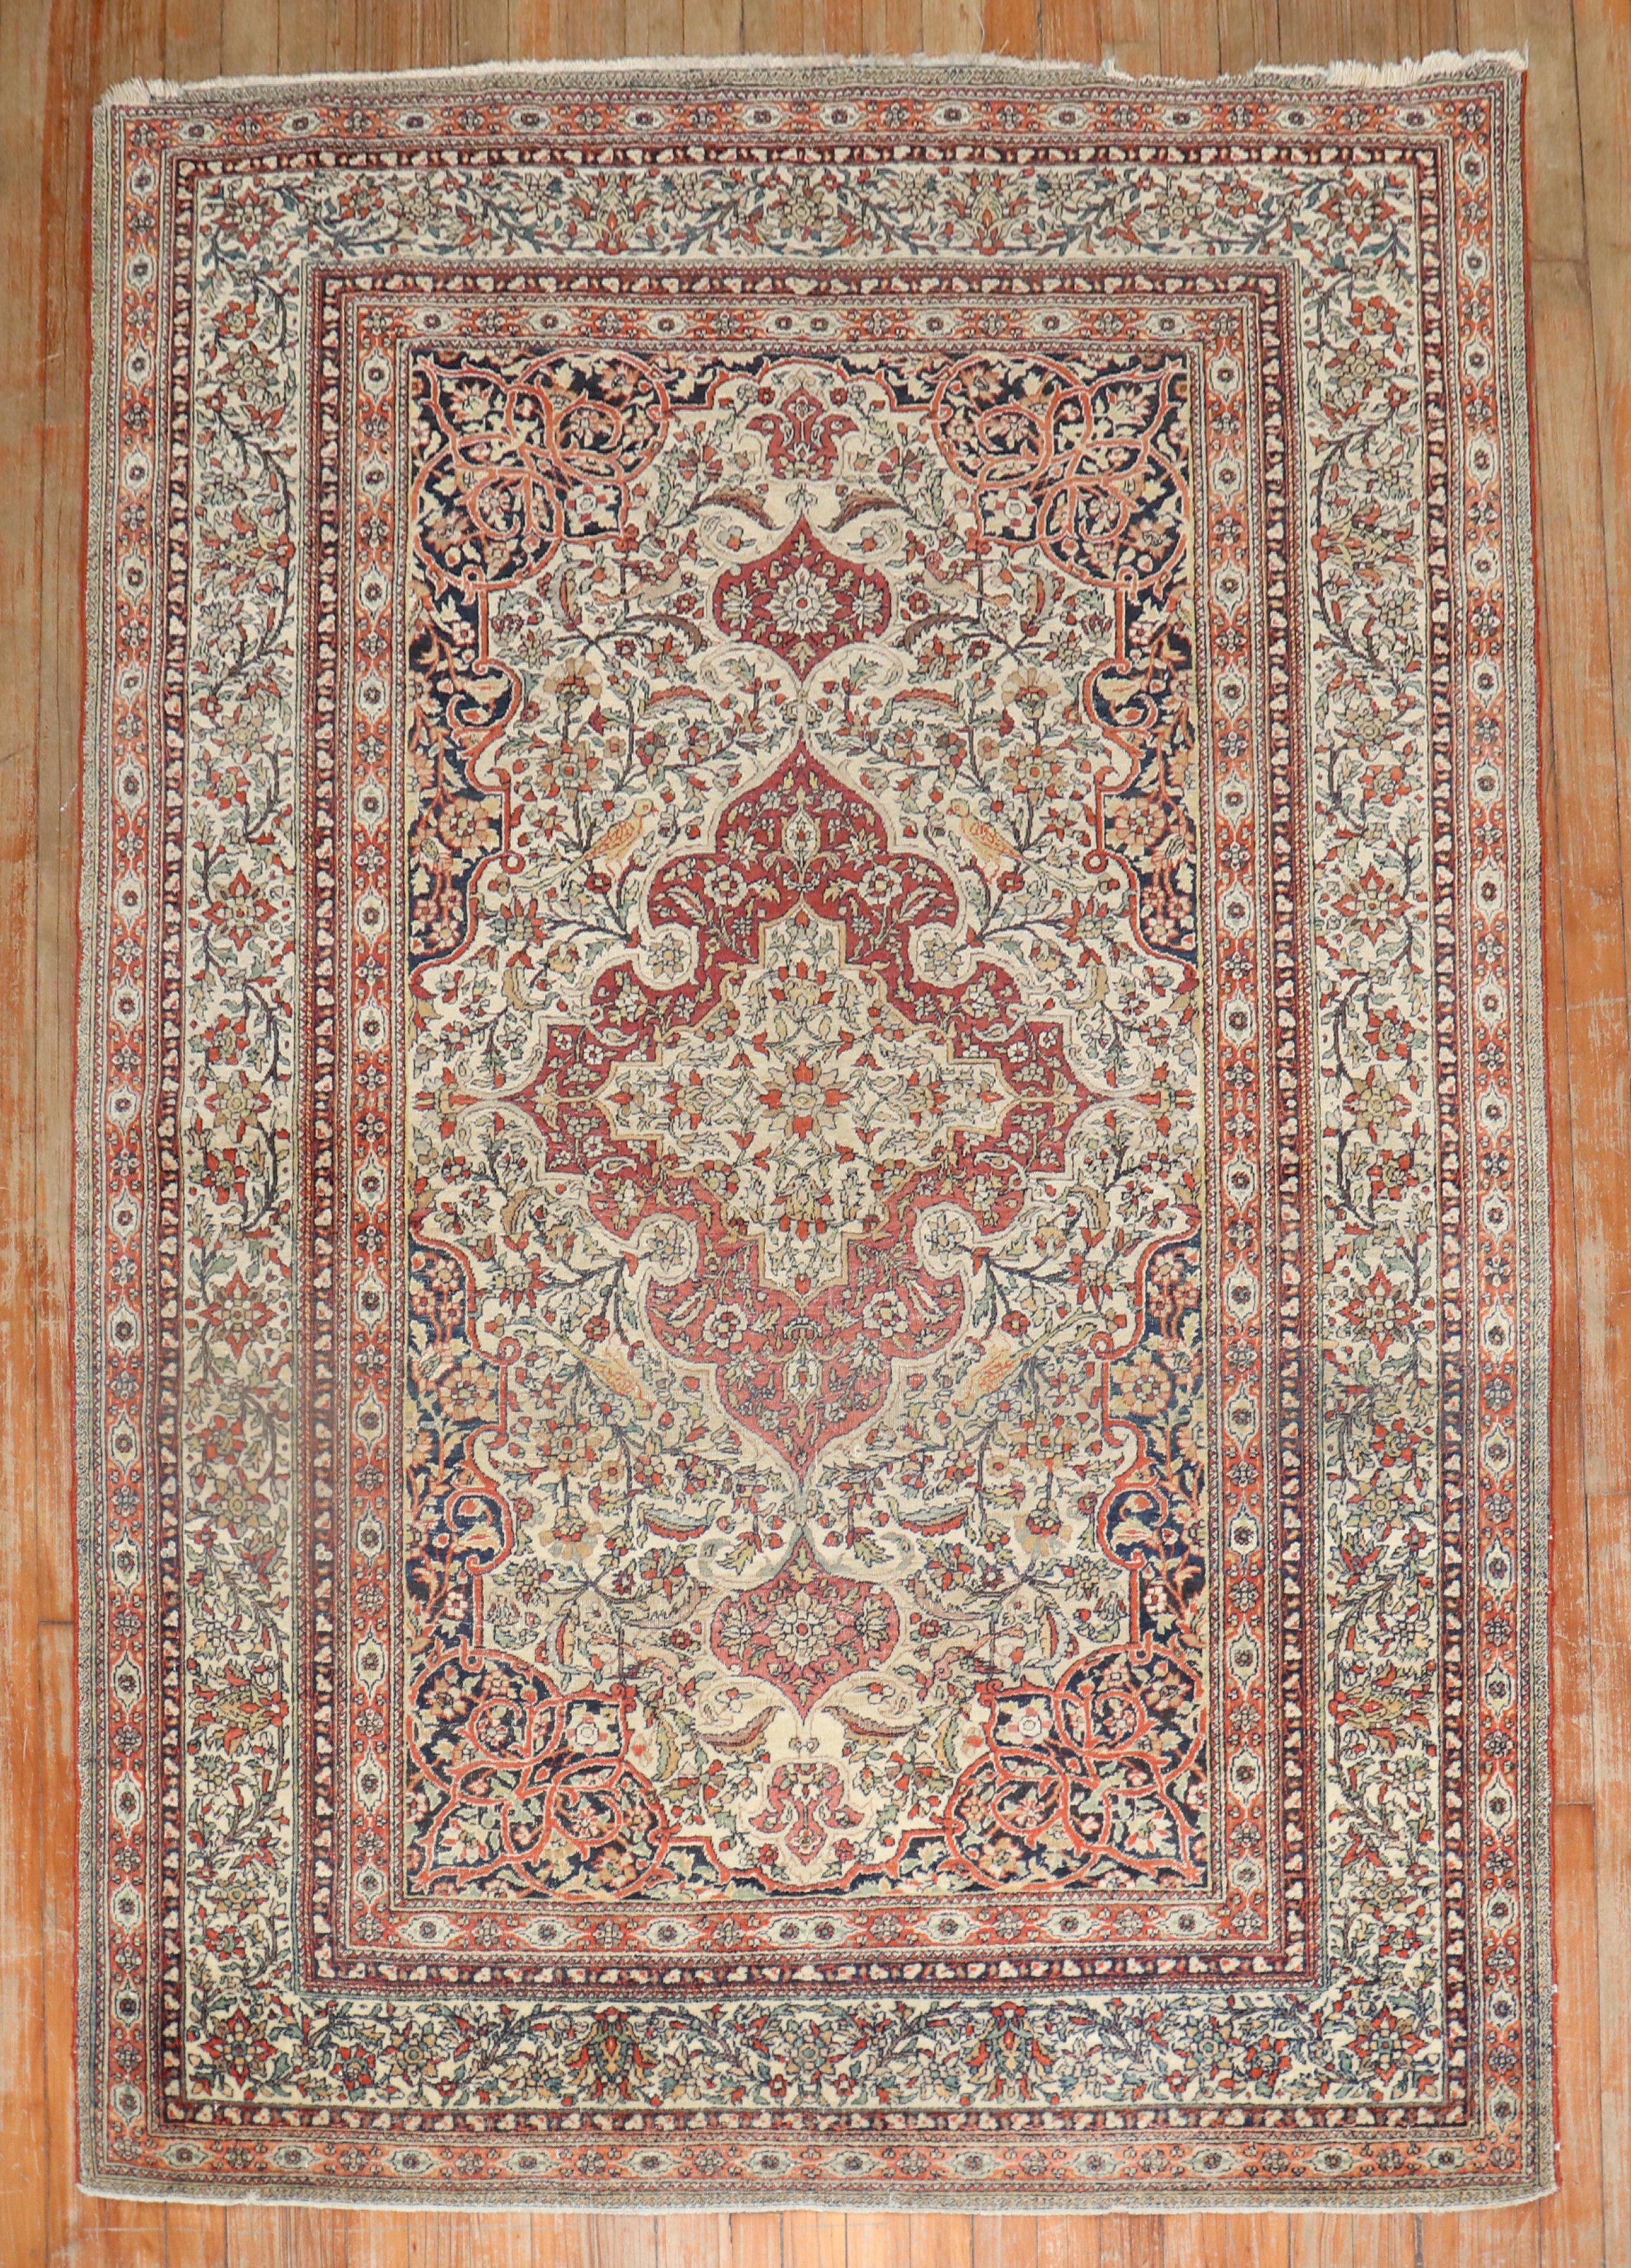 Fine quality early 20th century Persian Isfahan carpet with a Classic tradtiional design in ivory, rust, red and navy tones.

Measures: 4'7'' x 6'7''.